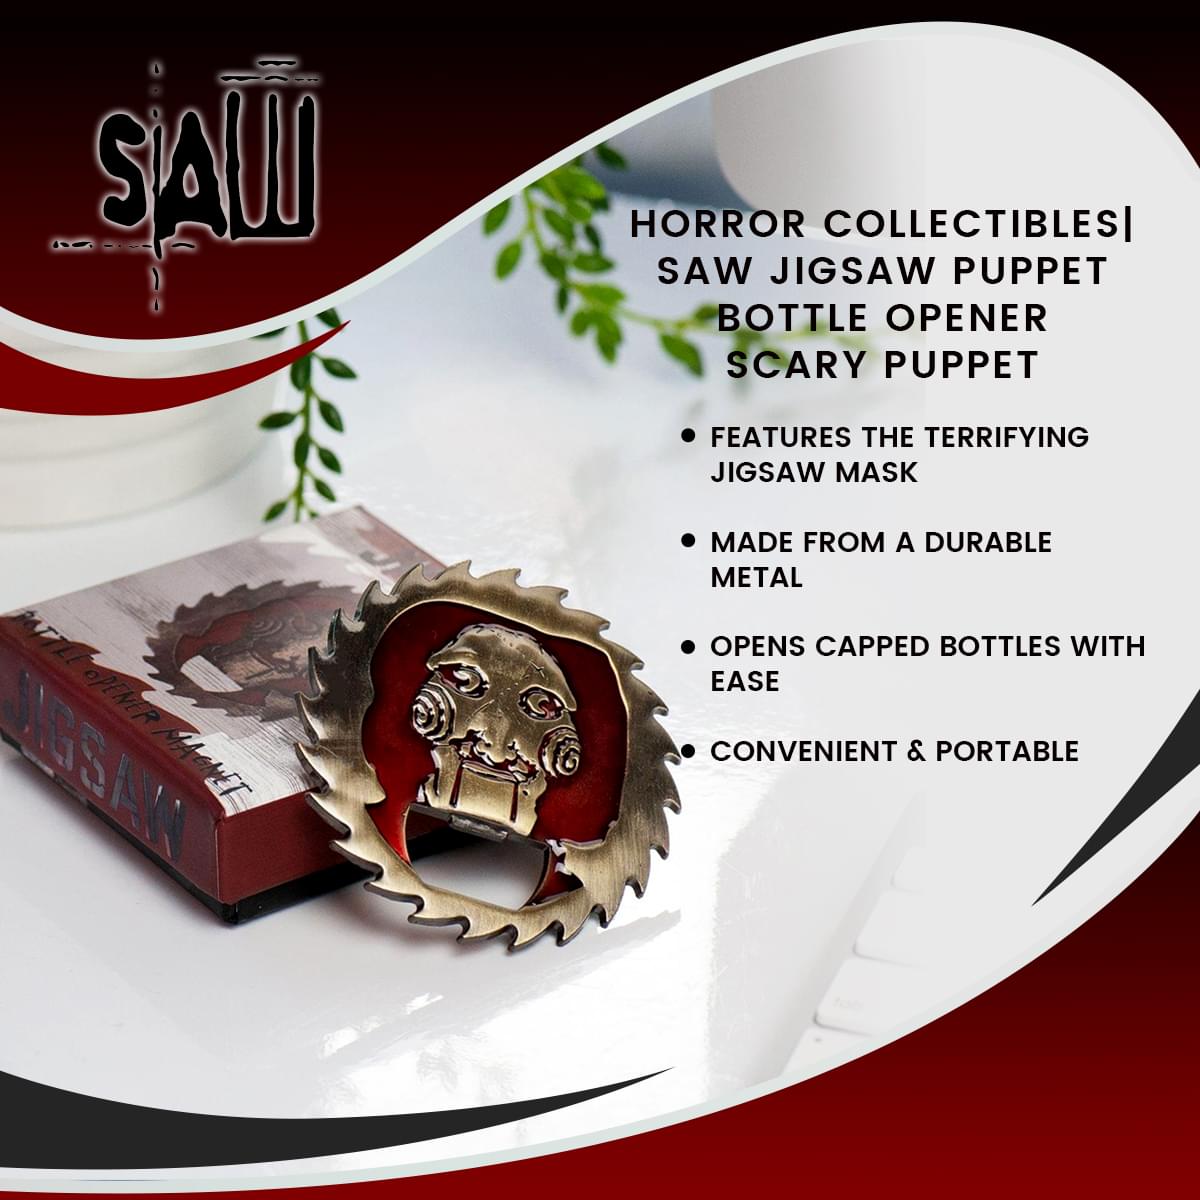 Horror Collectibles| Saw Jigsaw Puppet Bottle Opener | Scary Puppet